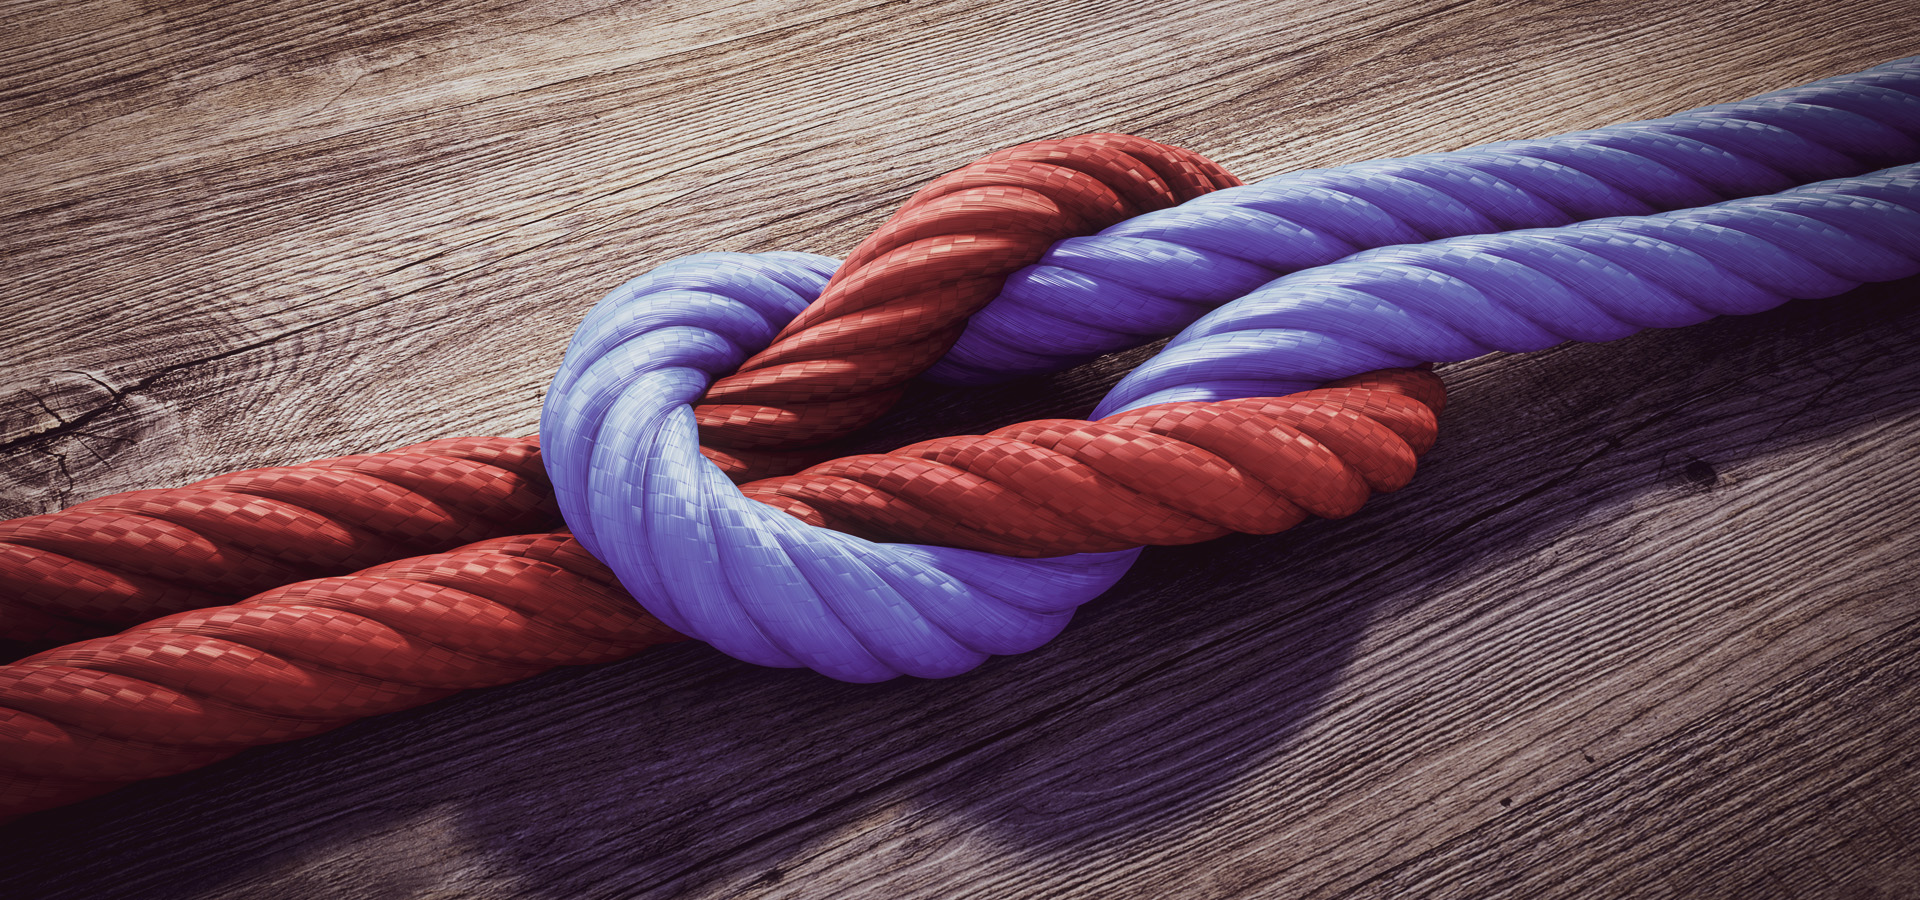 Red and blue rope tied in a knot